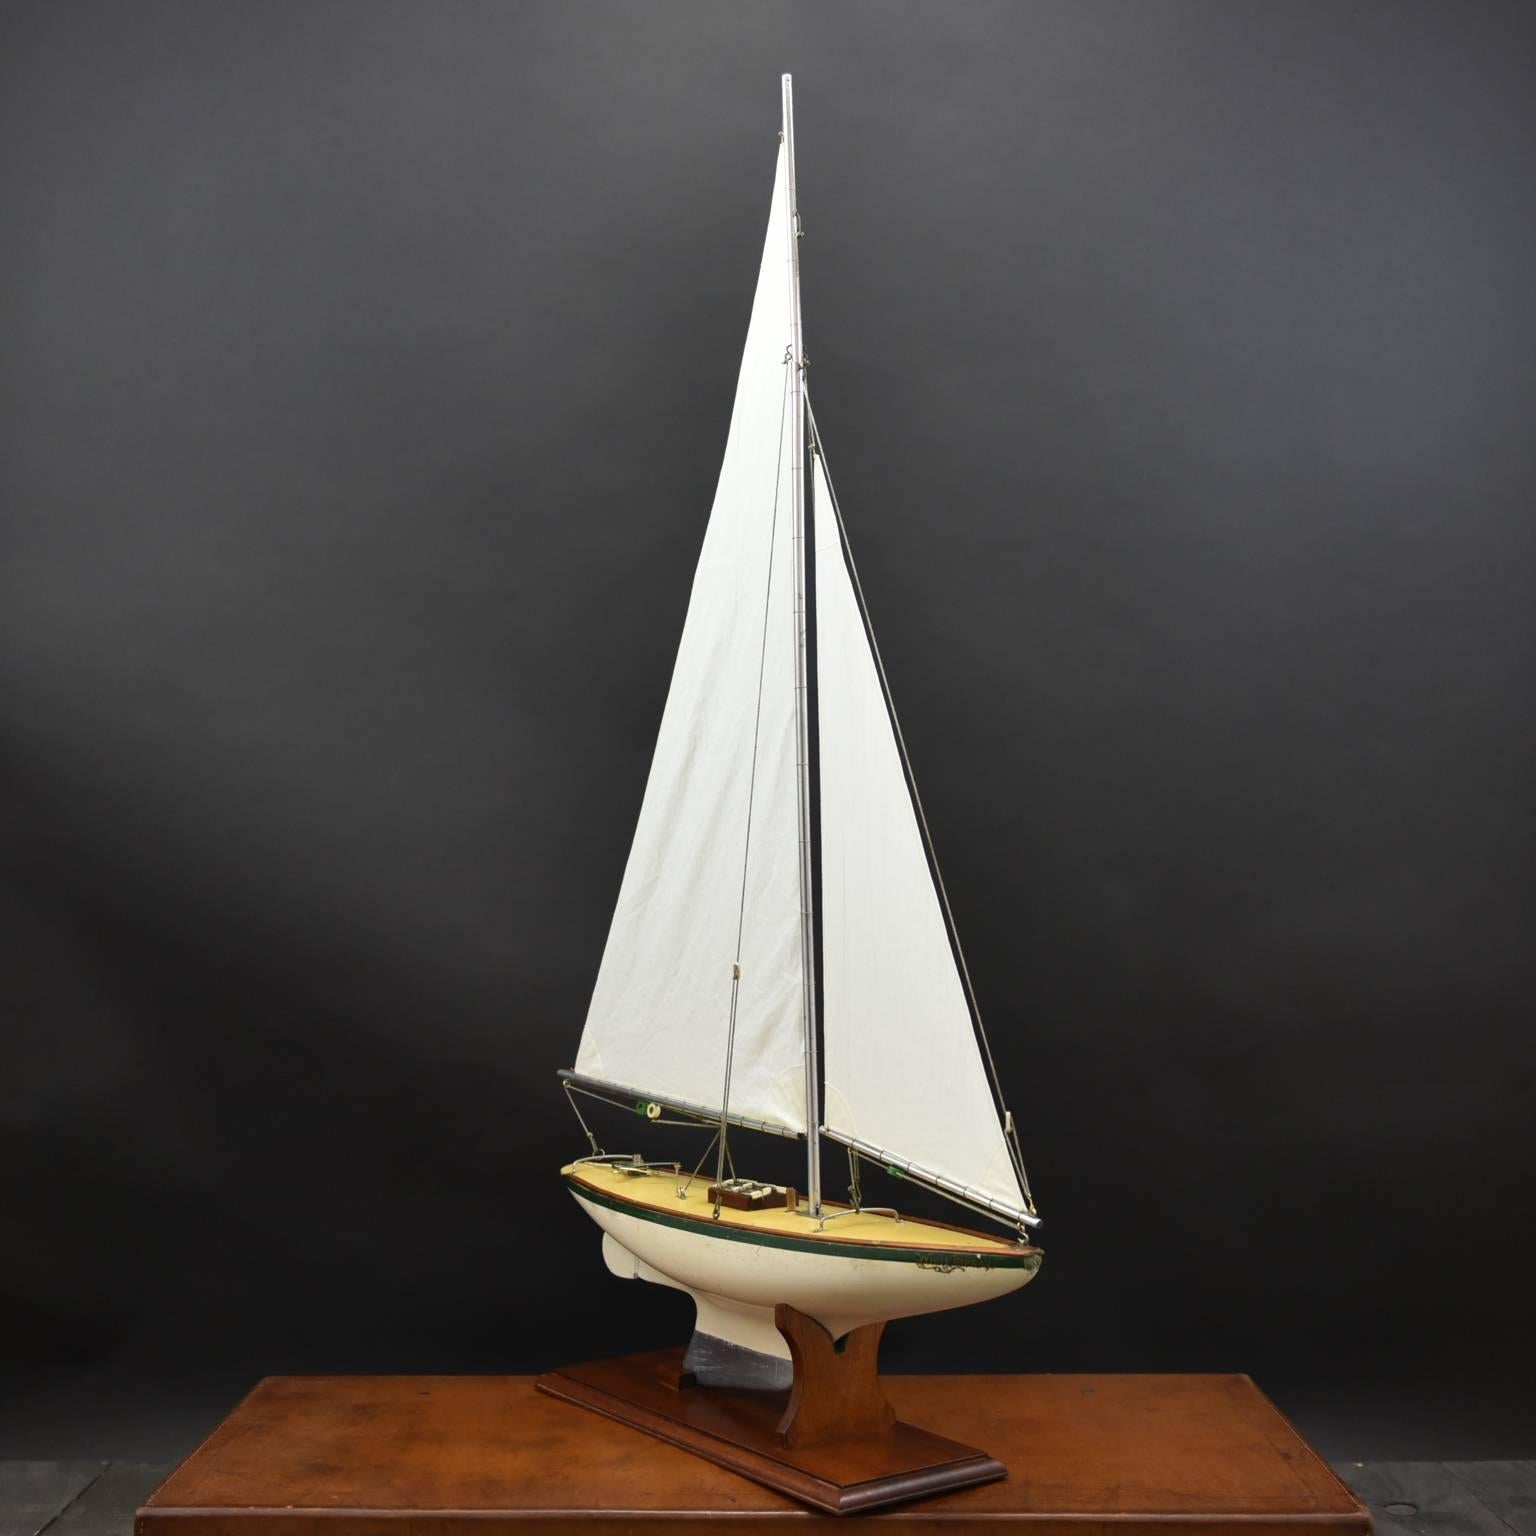 A splendid pond yacht, 'White Spray,' by Alexander for Bassett-Lowke. Has aluminium covered mast and boom, painted hull and a lead keel, circa 1930. Presented on a newly made wooden stand.
Alexander pond yachts are now accepted to have some of the